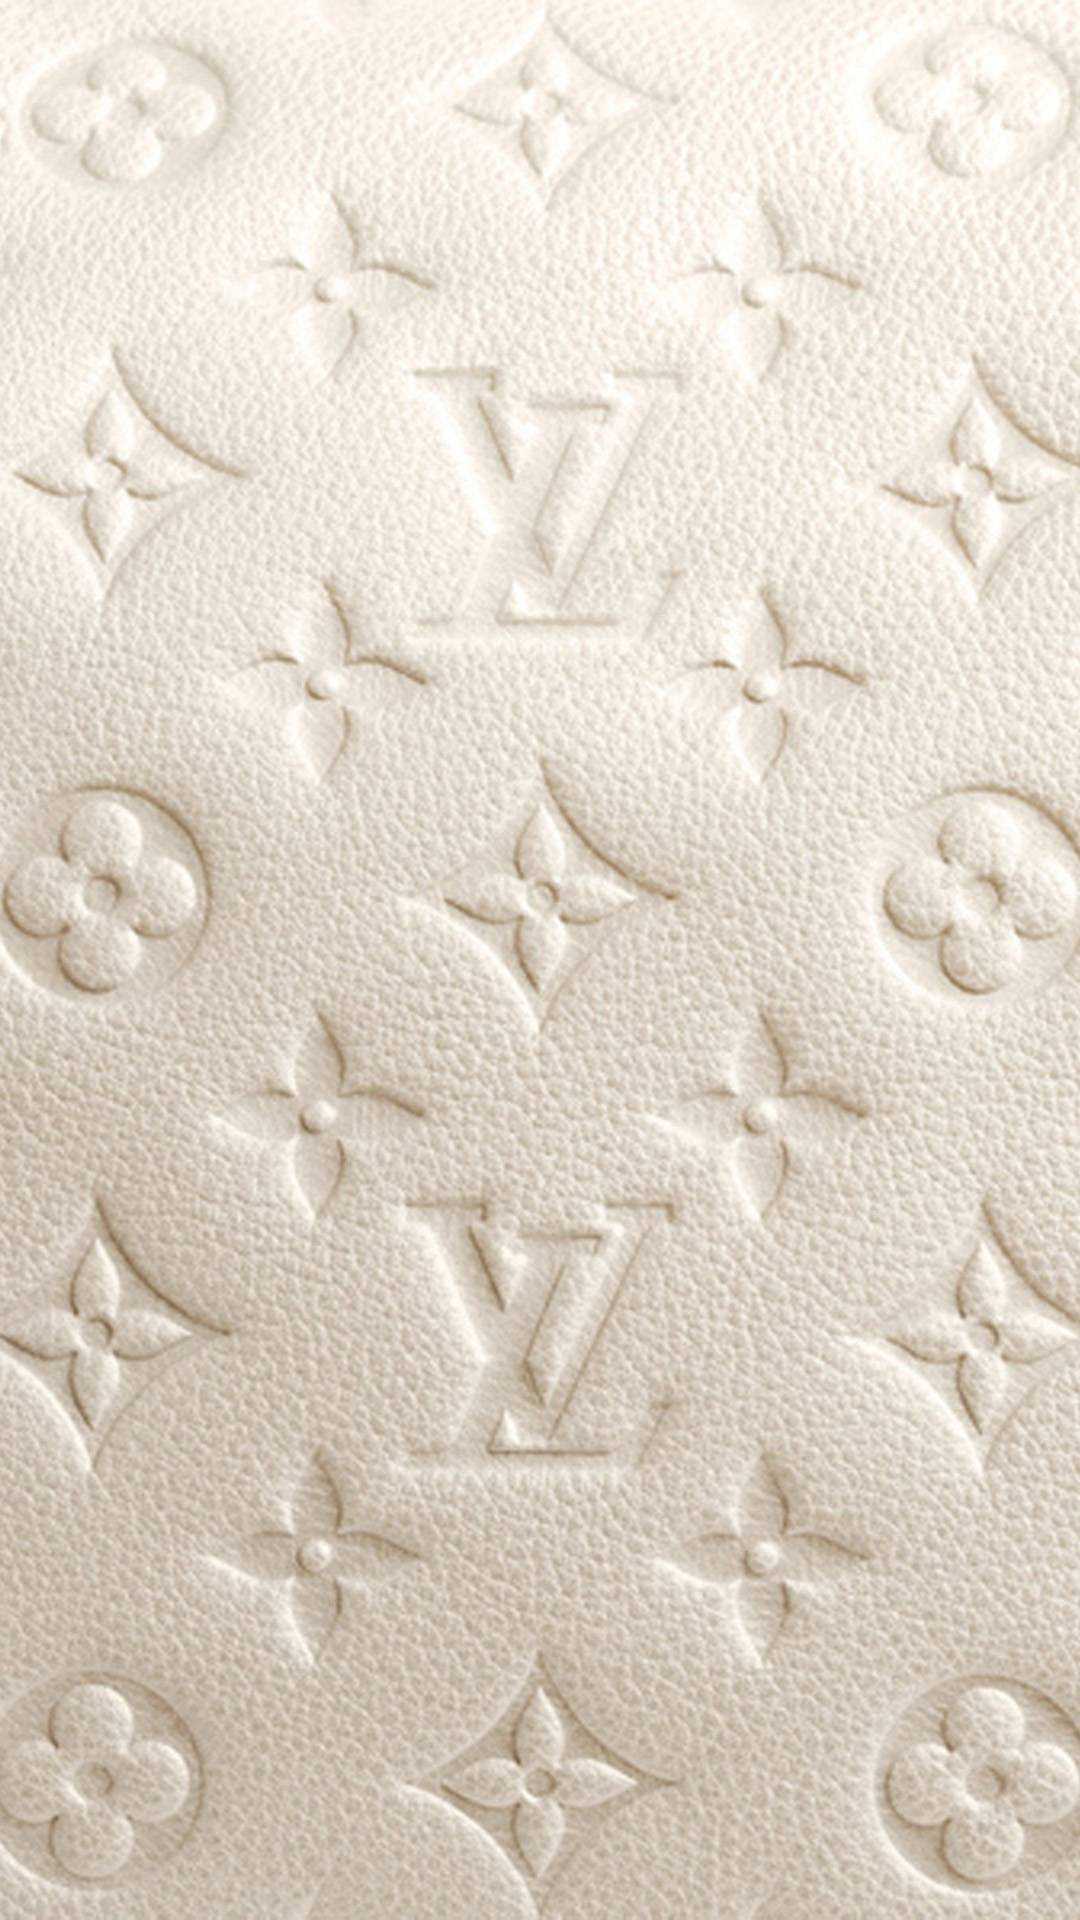 34+] Louis Vuitton iPhone Wallpapers